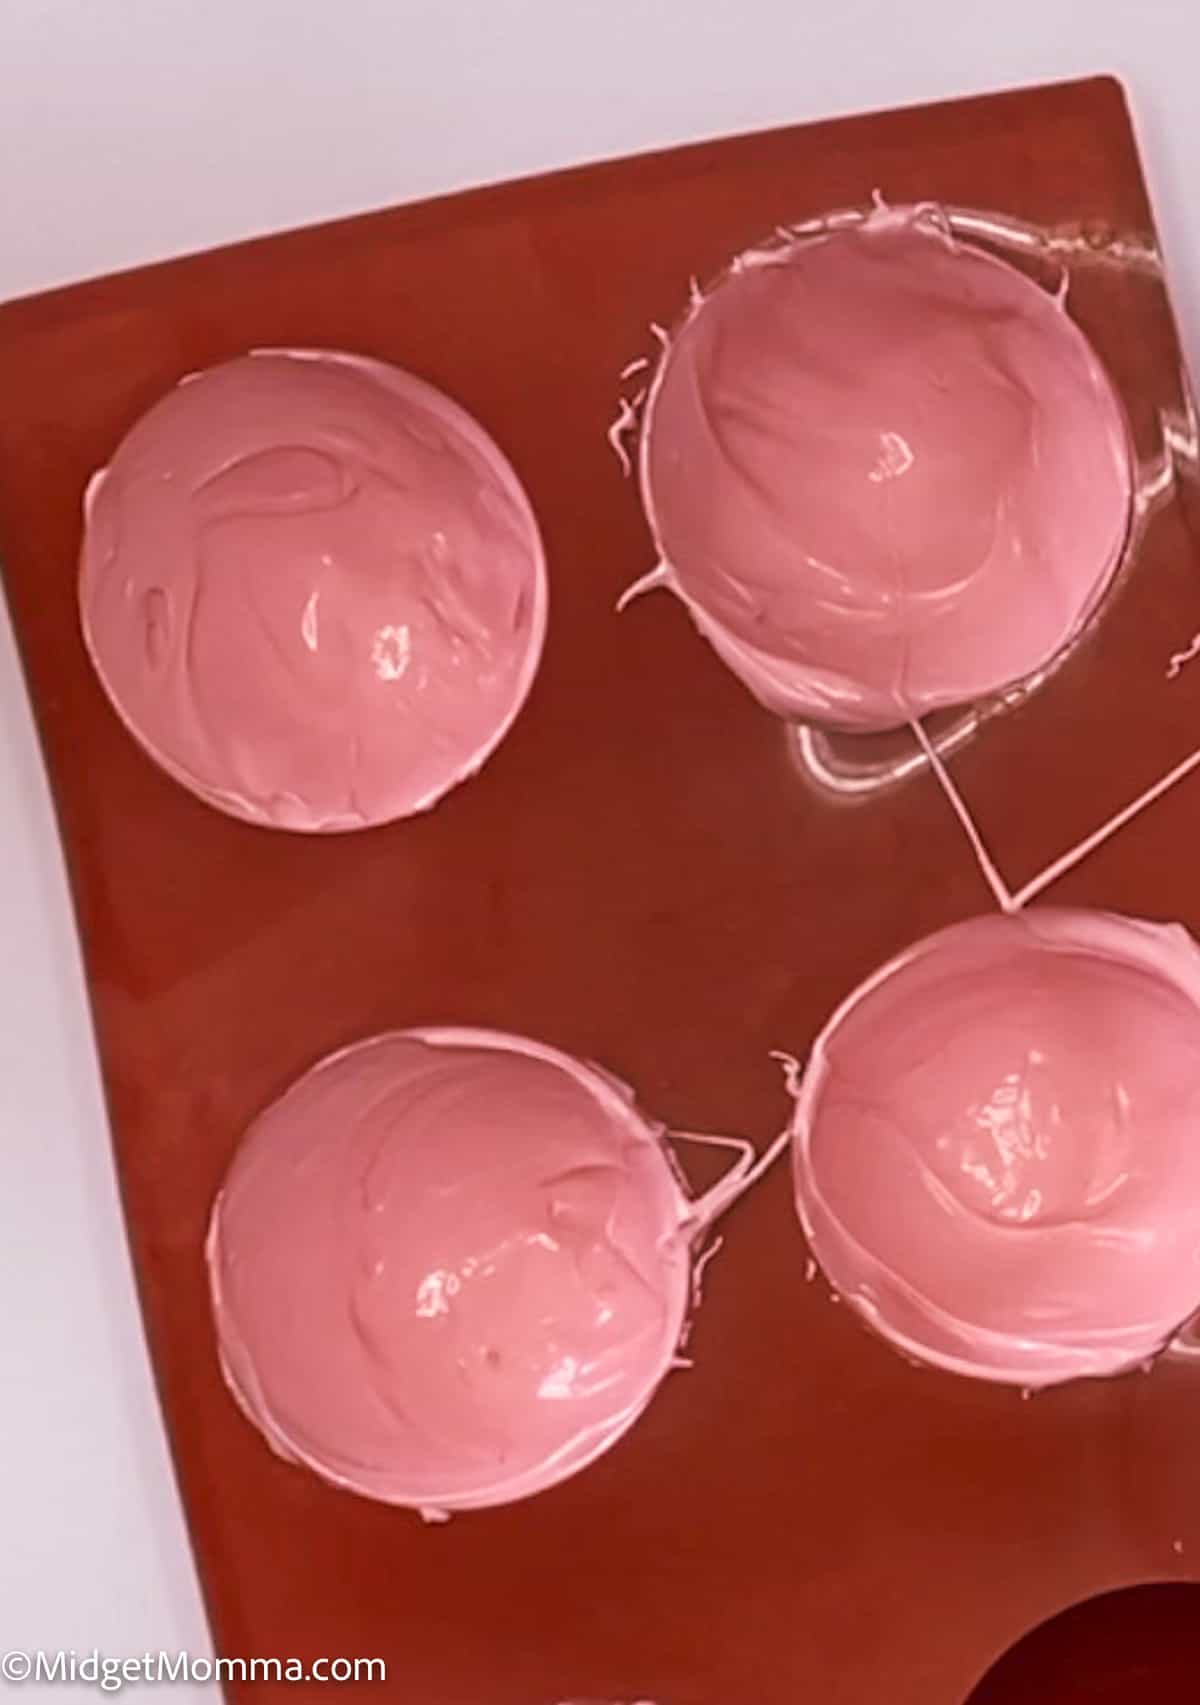 melted strawberry candy melts in a sphere mold